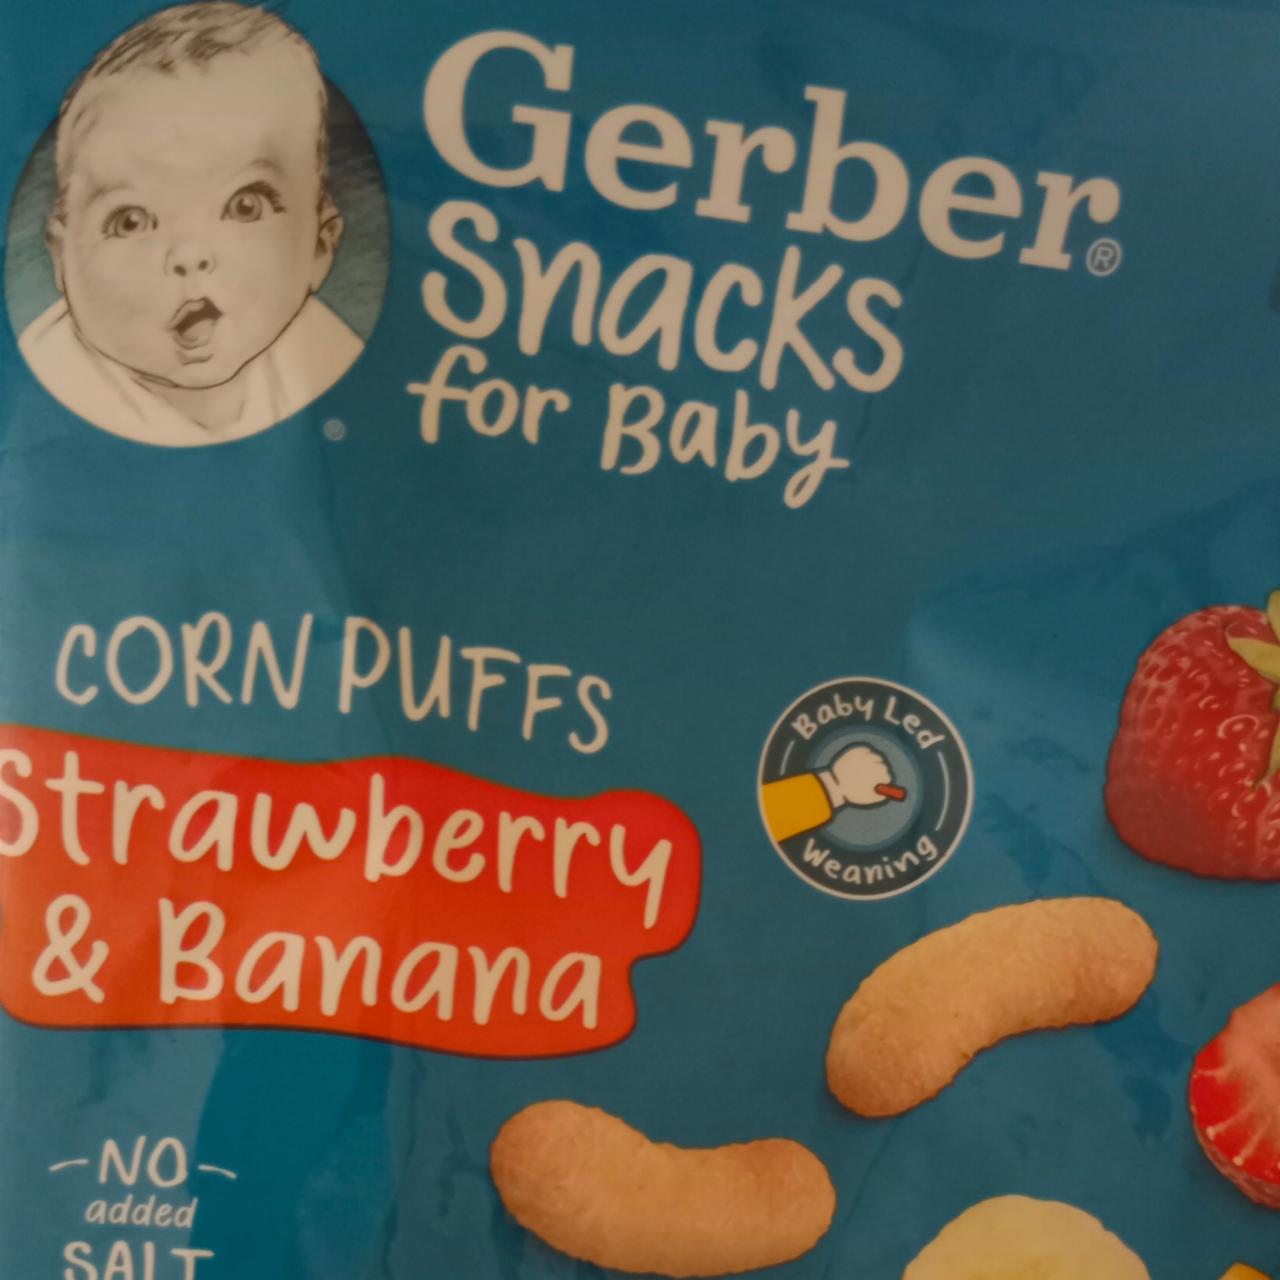 Fotografie - Gerber snacks corn puffs strawberry and babana BabyLed Weaning